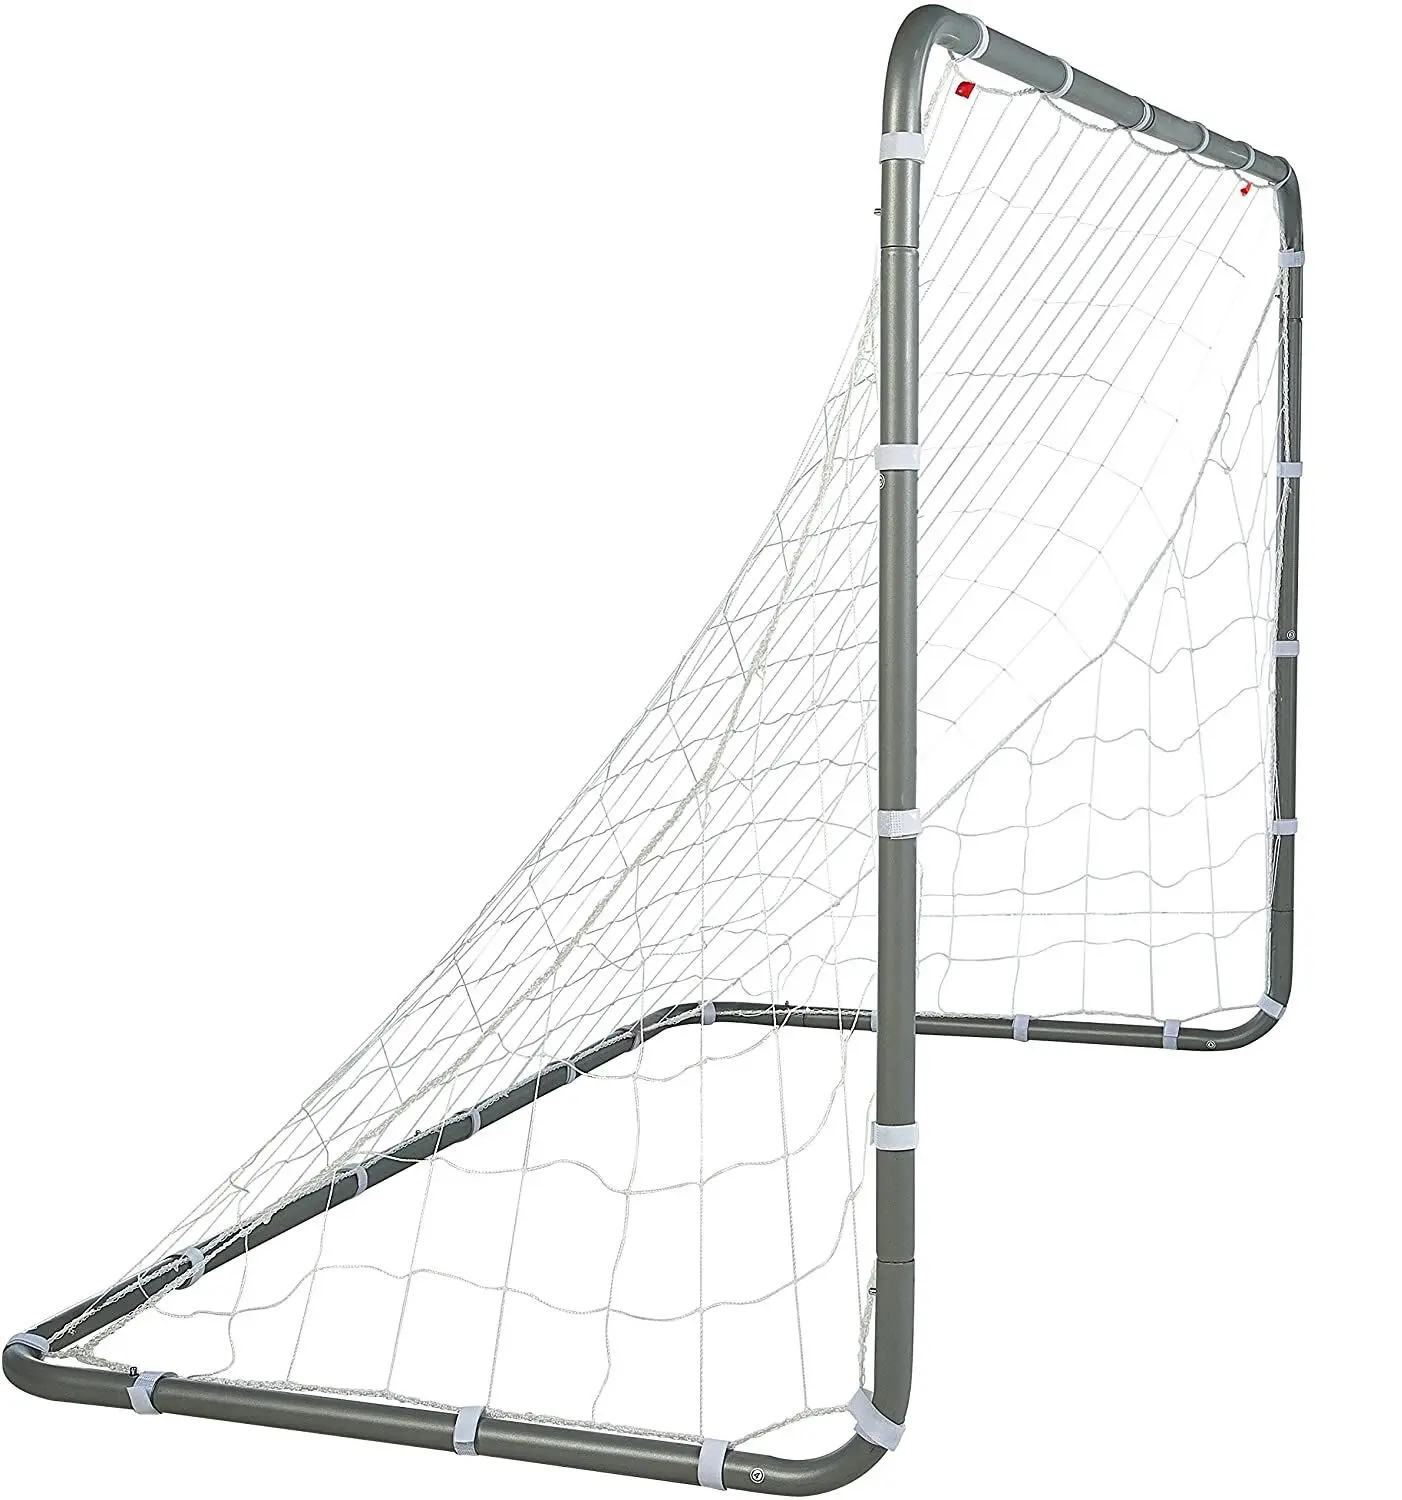 China Factory Popular 12ft*6ft Outdoor Team Sporting Goods Portable Metal steel Soccer Football Goal Post with net